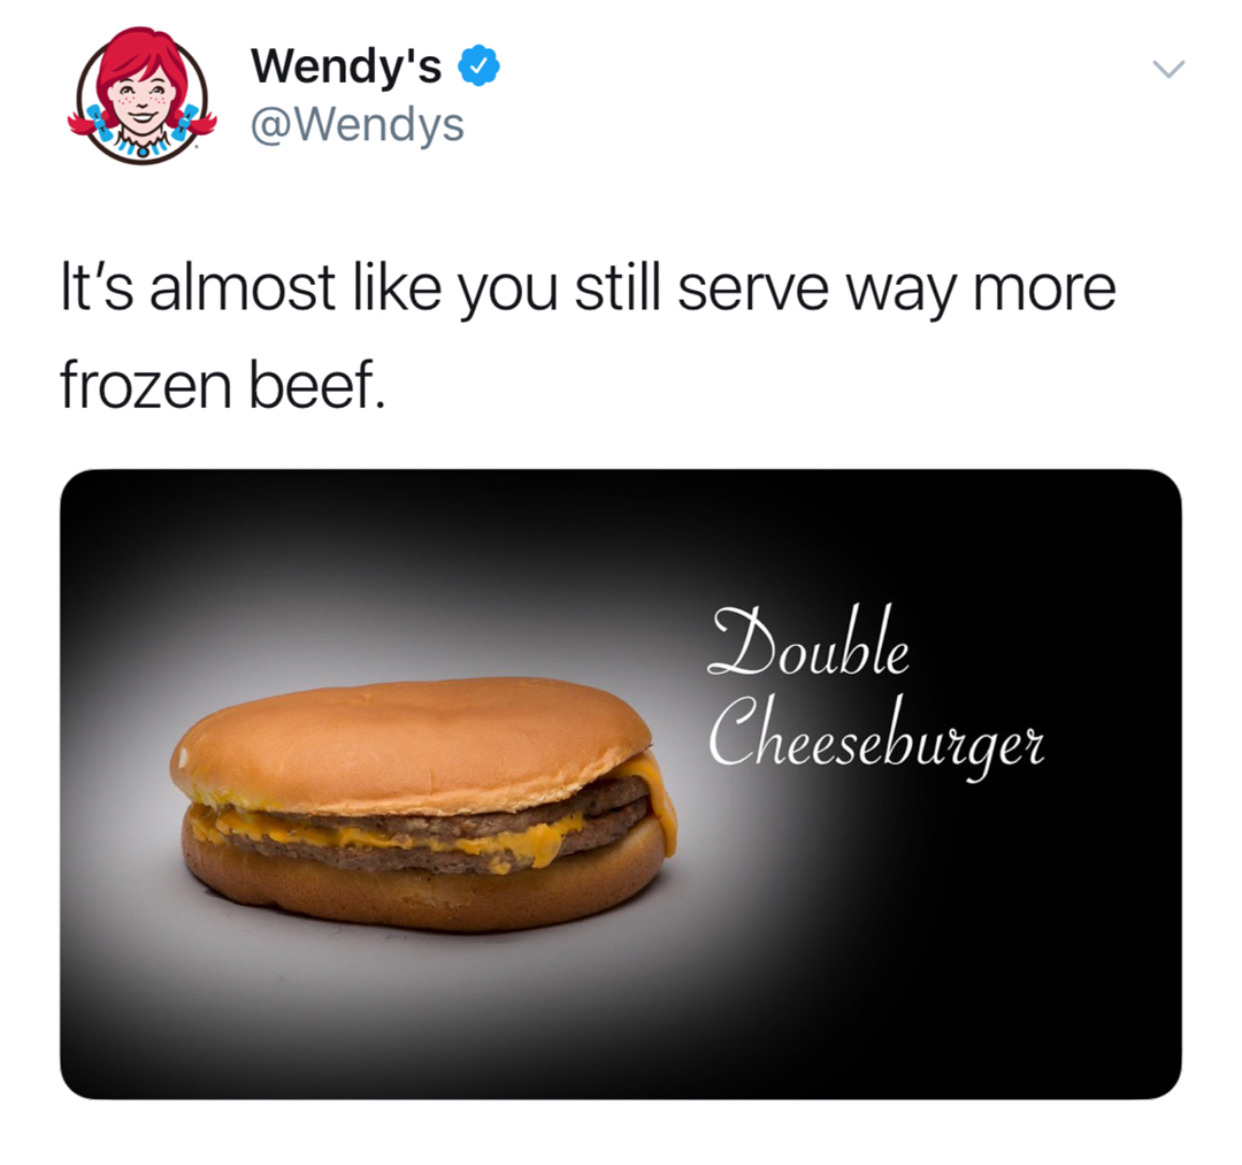 wendy's company - Wendy's It's almost you still serve way more frozen beef. Double Cheeseburger